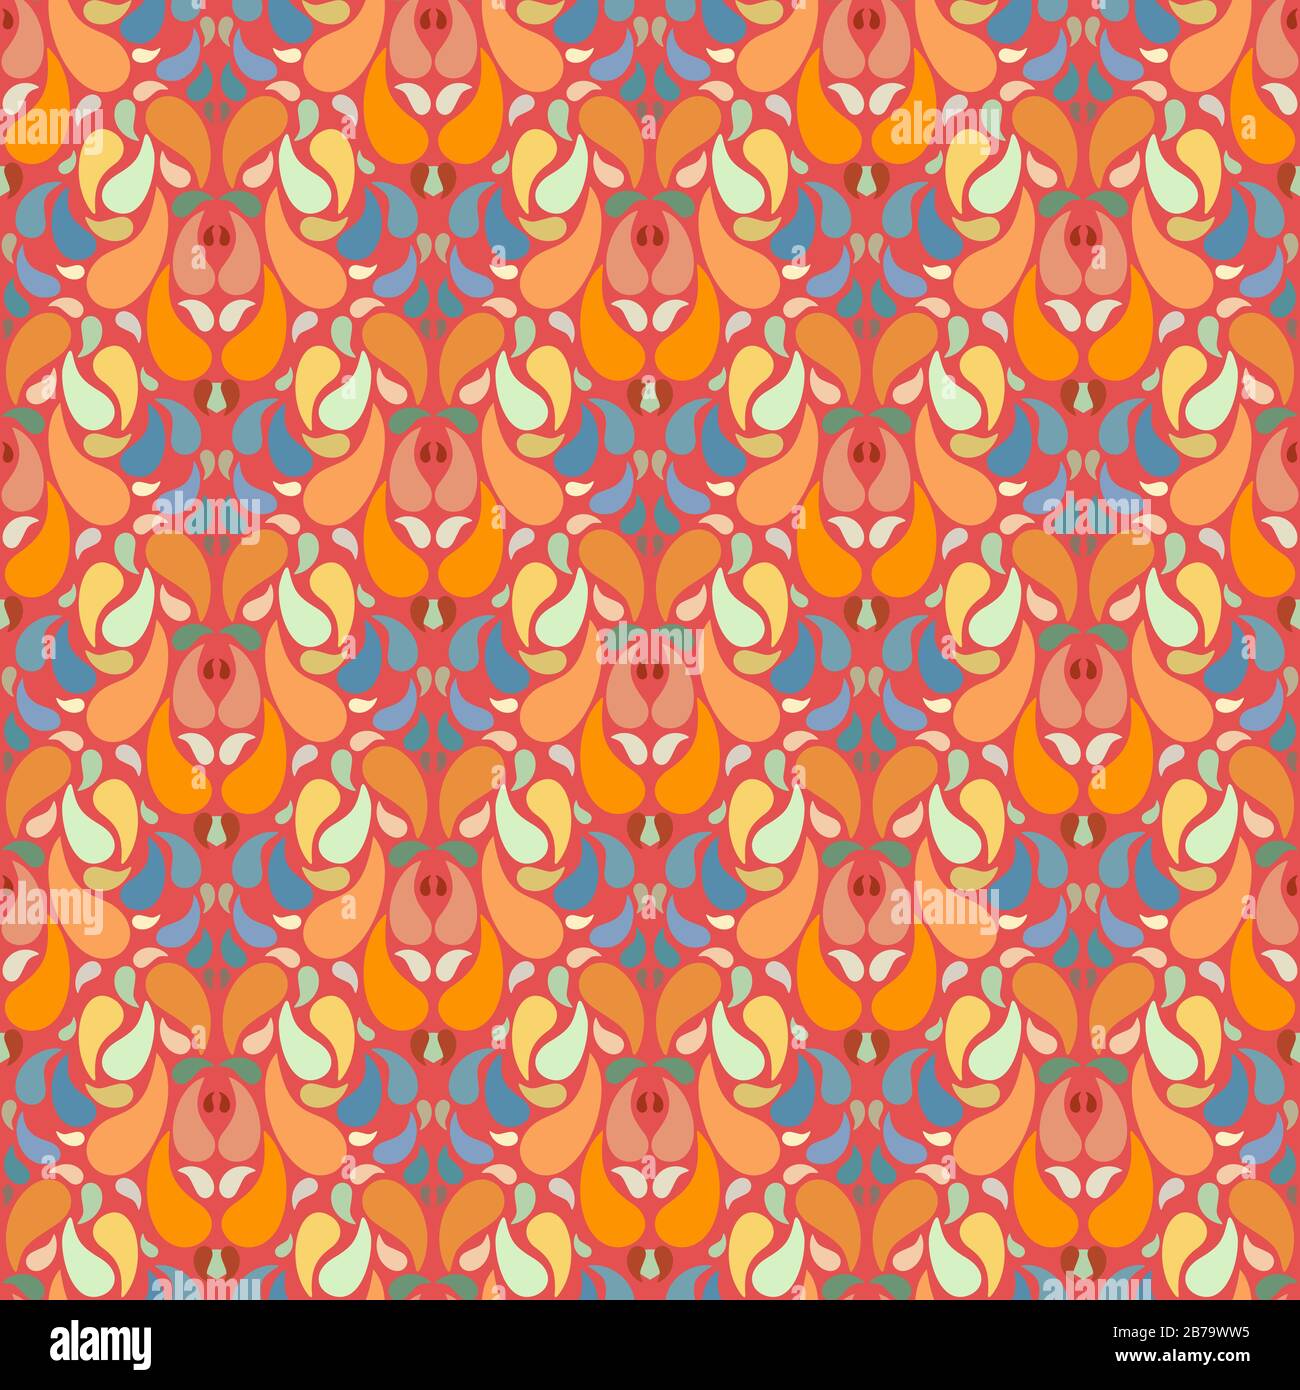 Retro colored vector seamless repeating surface pattern with paisley in warm orange tones paired with cooler hues creates a blast from the past. Stock Vector